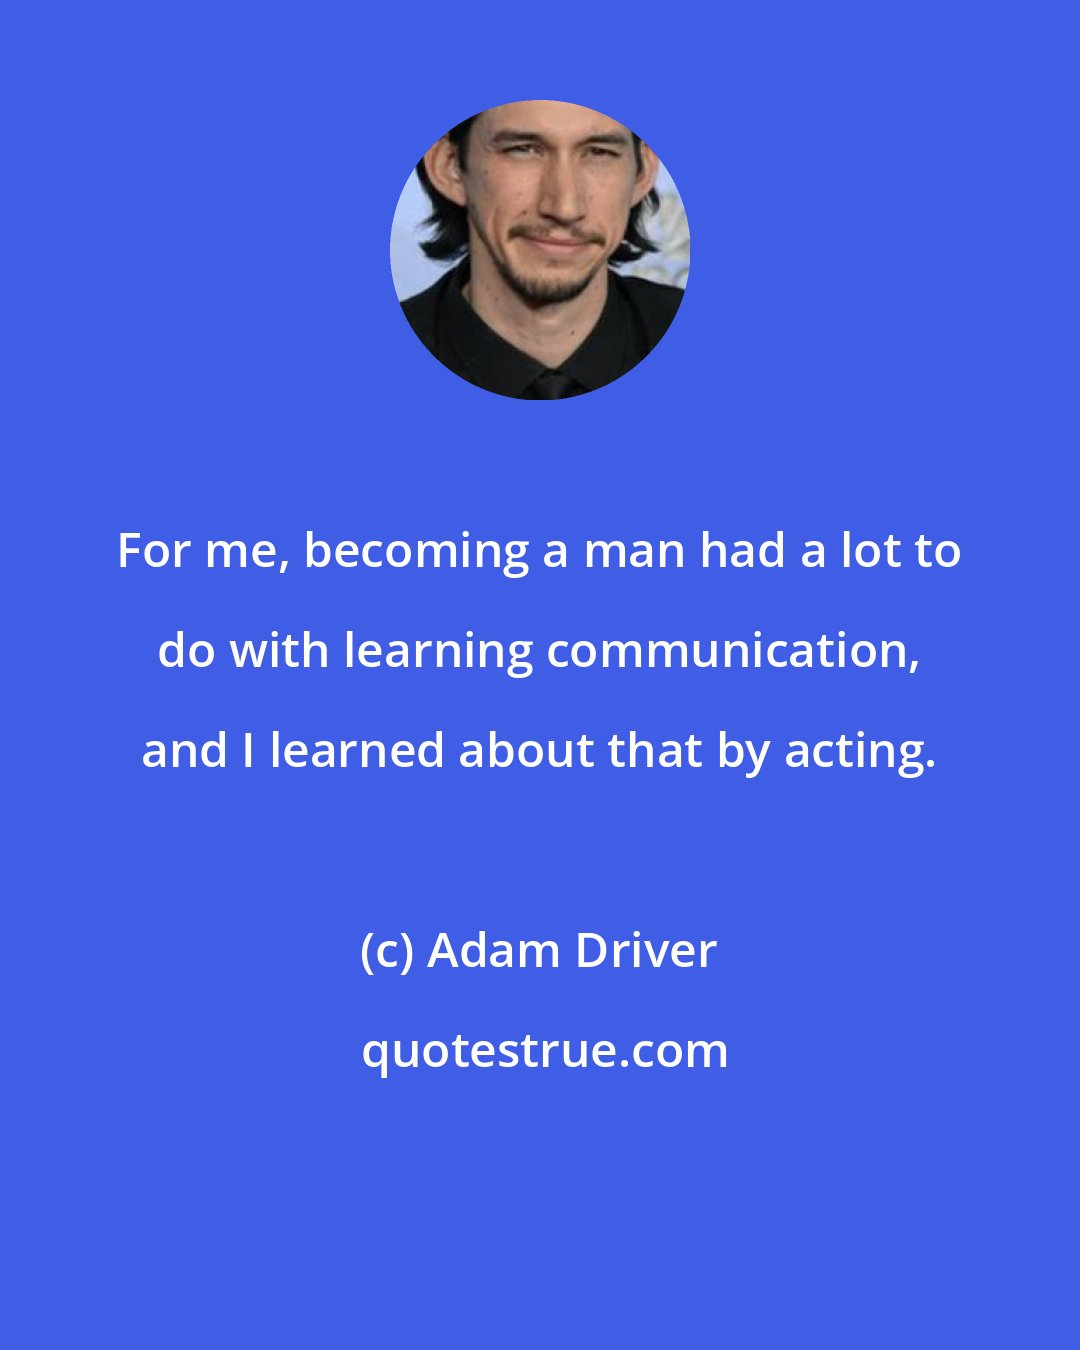 Adam Driver: For me, becoming a man had a lot to do with learning communication, and I learned about that by acting.